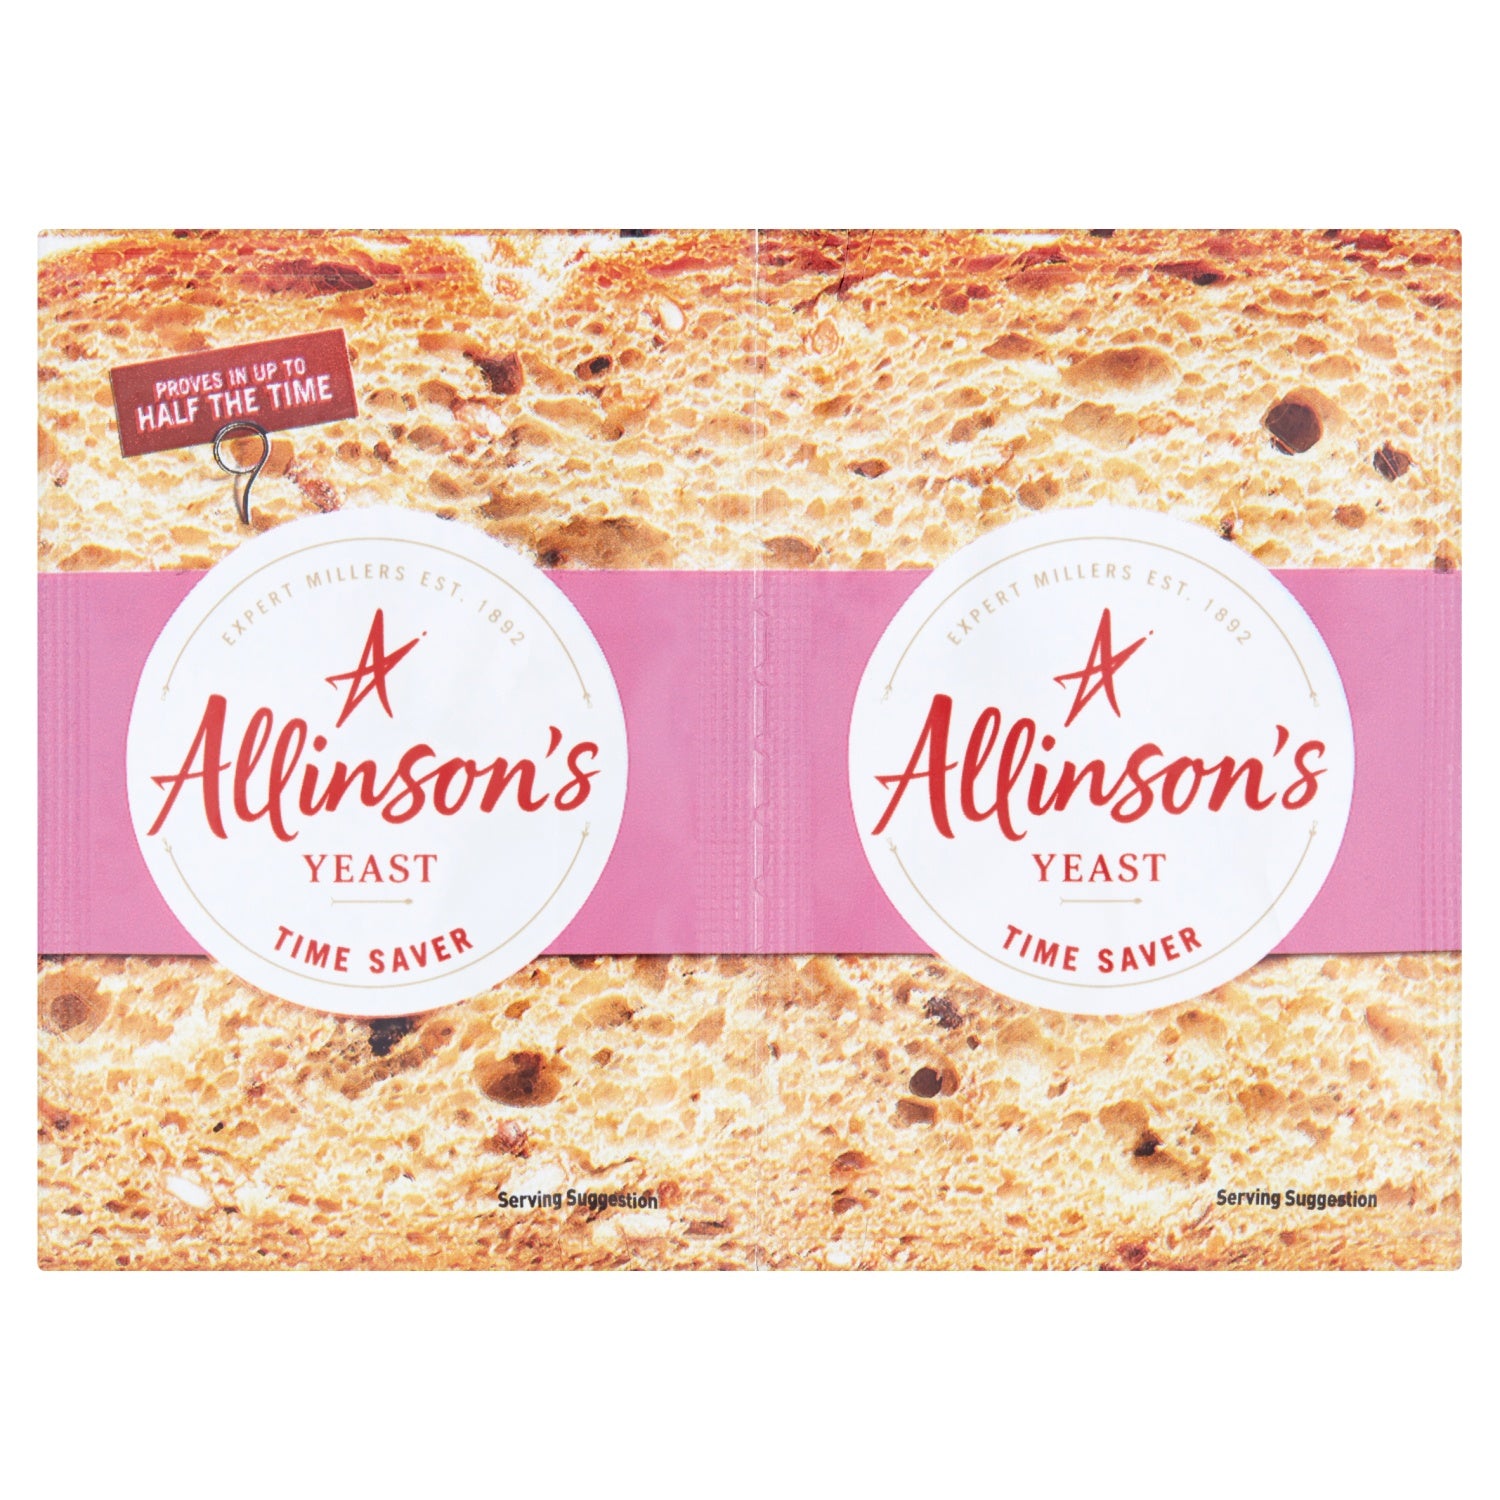 Allinsons Yeast Time Saver 2 x 115g